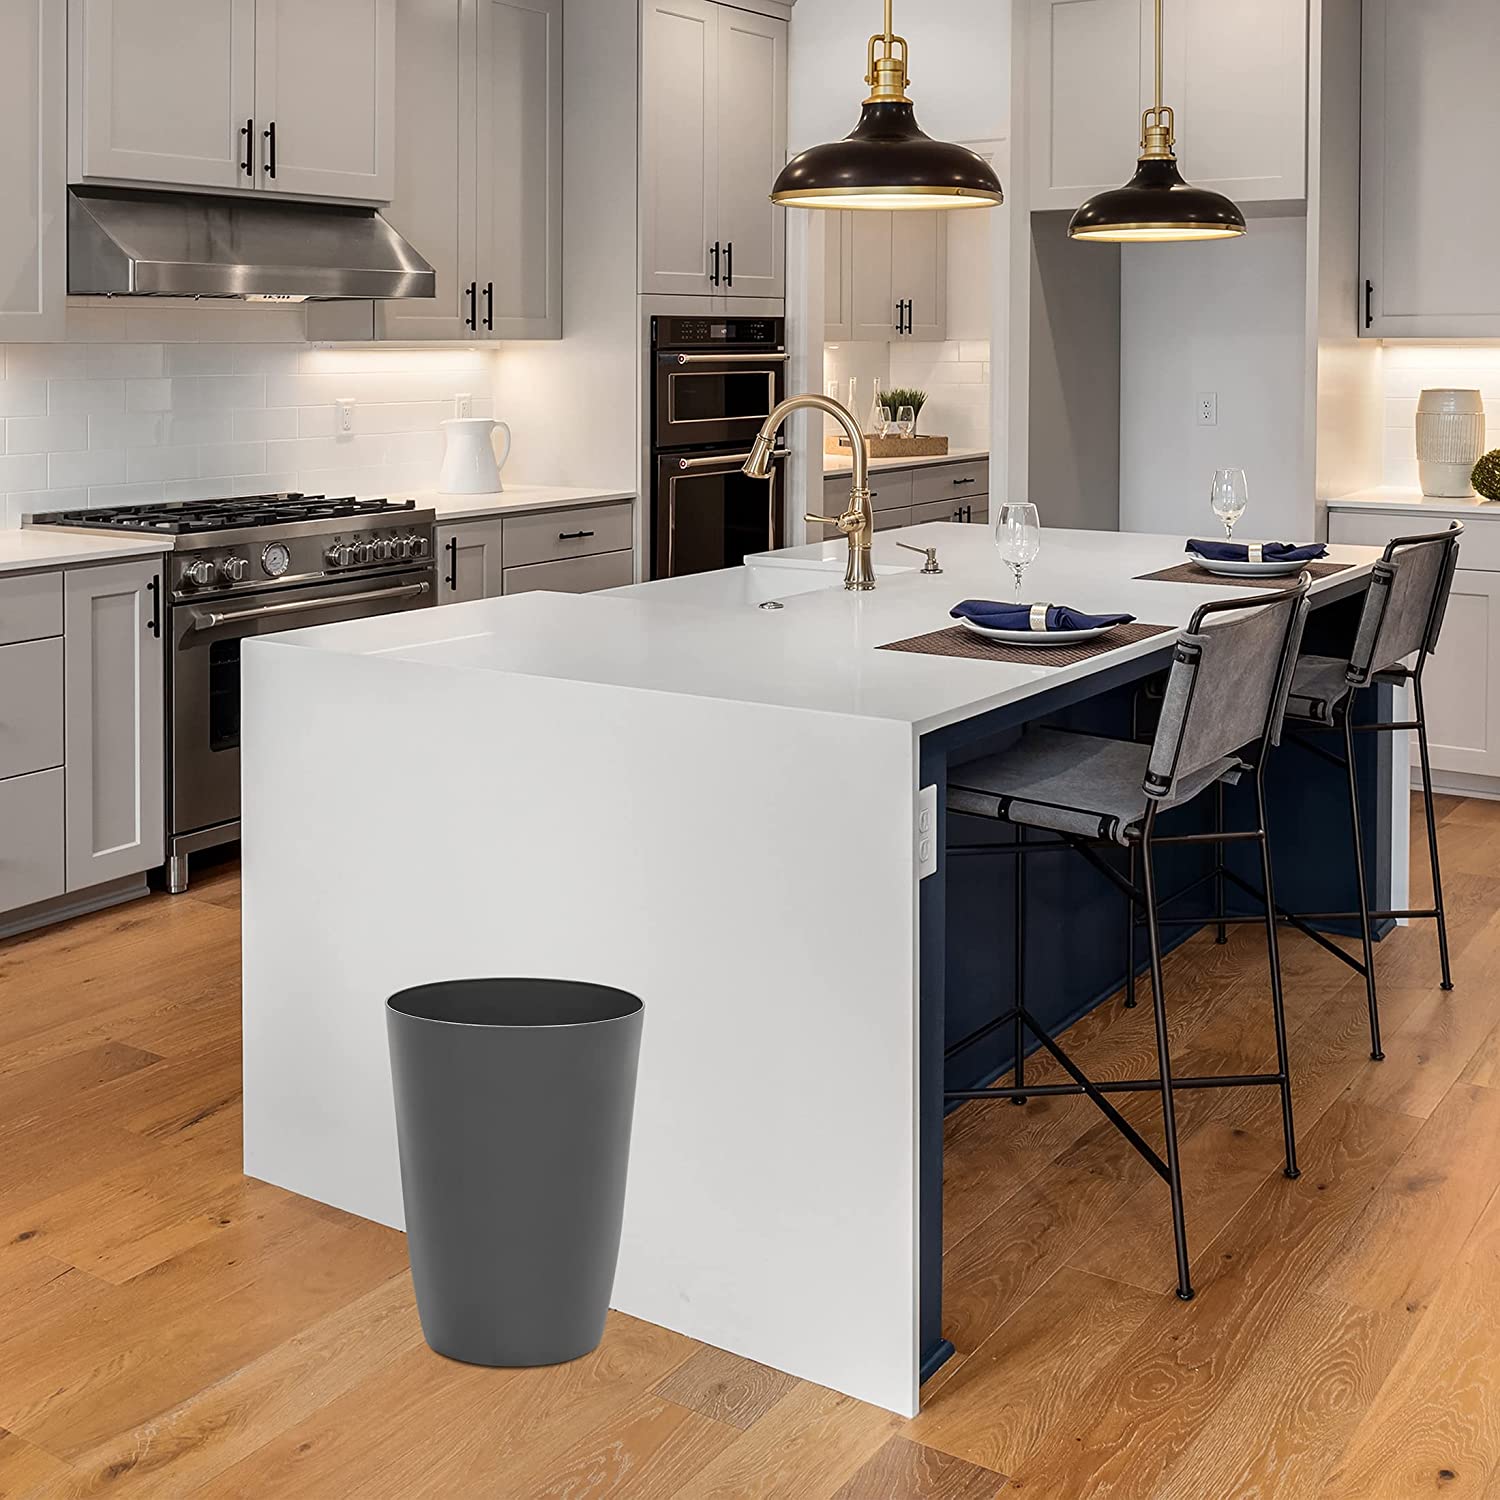 Kitchen Trash Can Bedroom Garbage Can Garbage Can Large Office